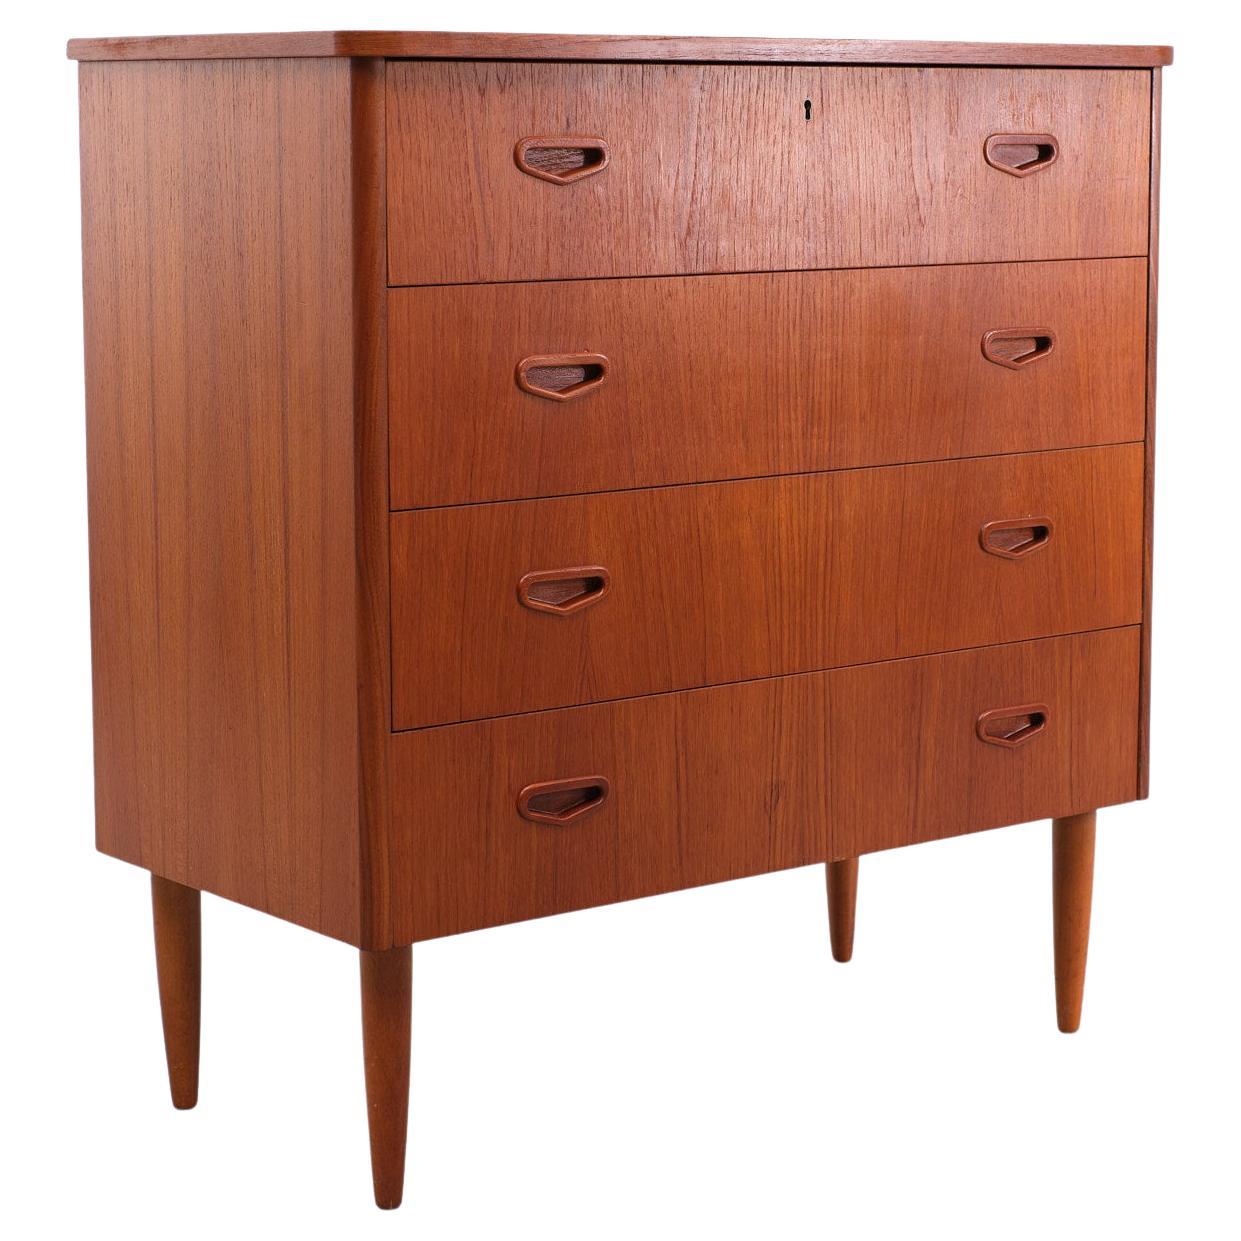 Very nice attractive chest off drawers. 4 drawers. One with a key 
Warm Teak color, good condition.